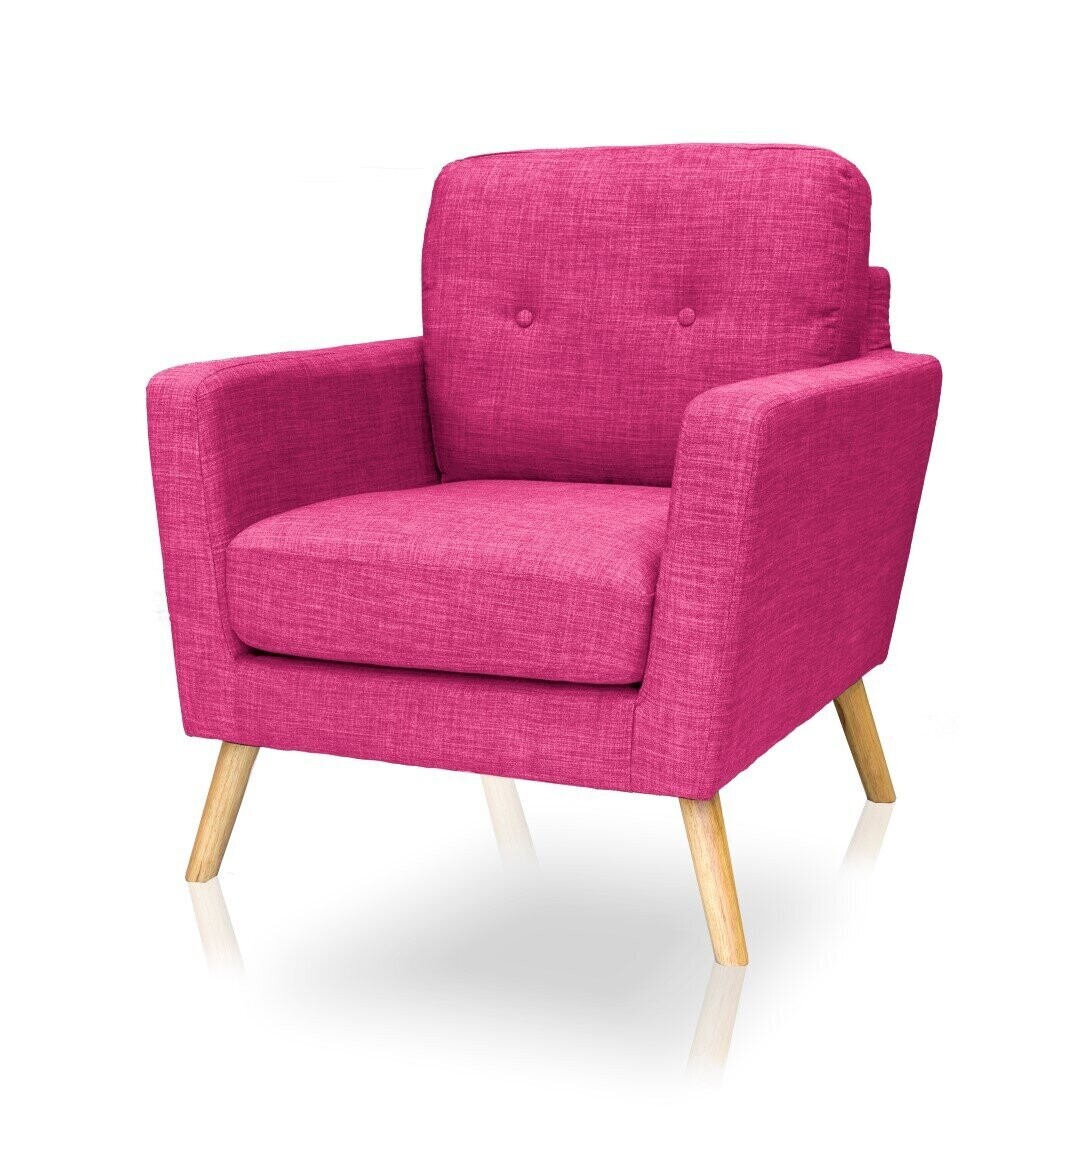 Clio occasional chair in pink chenille